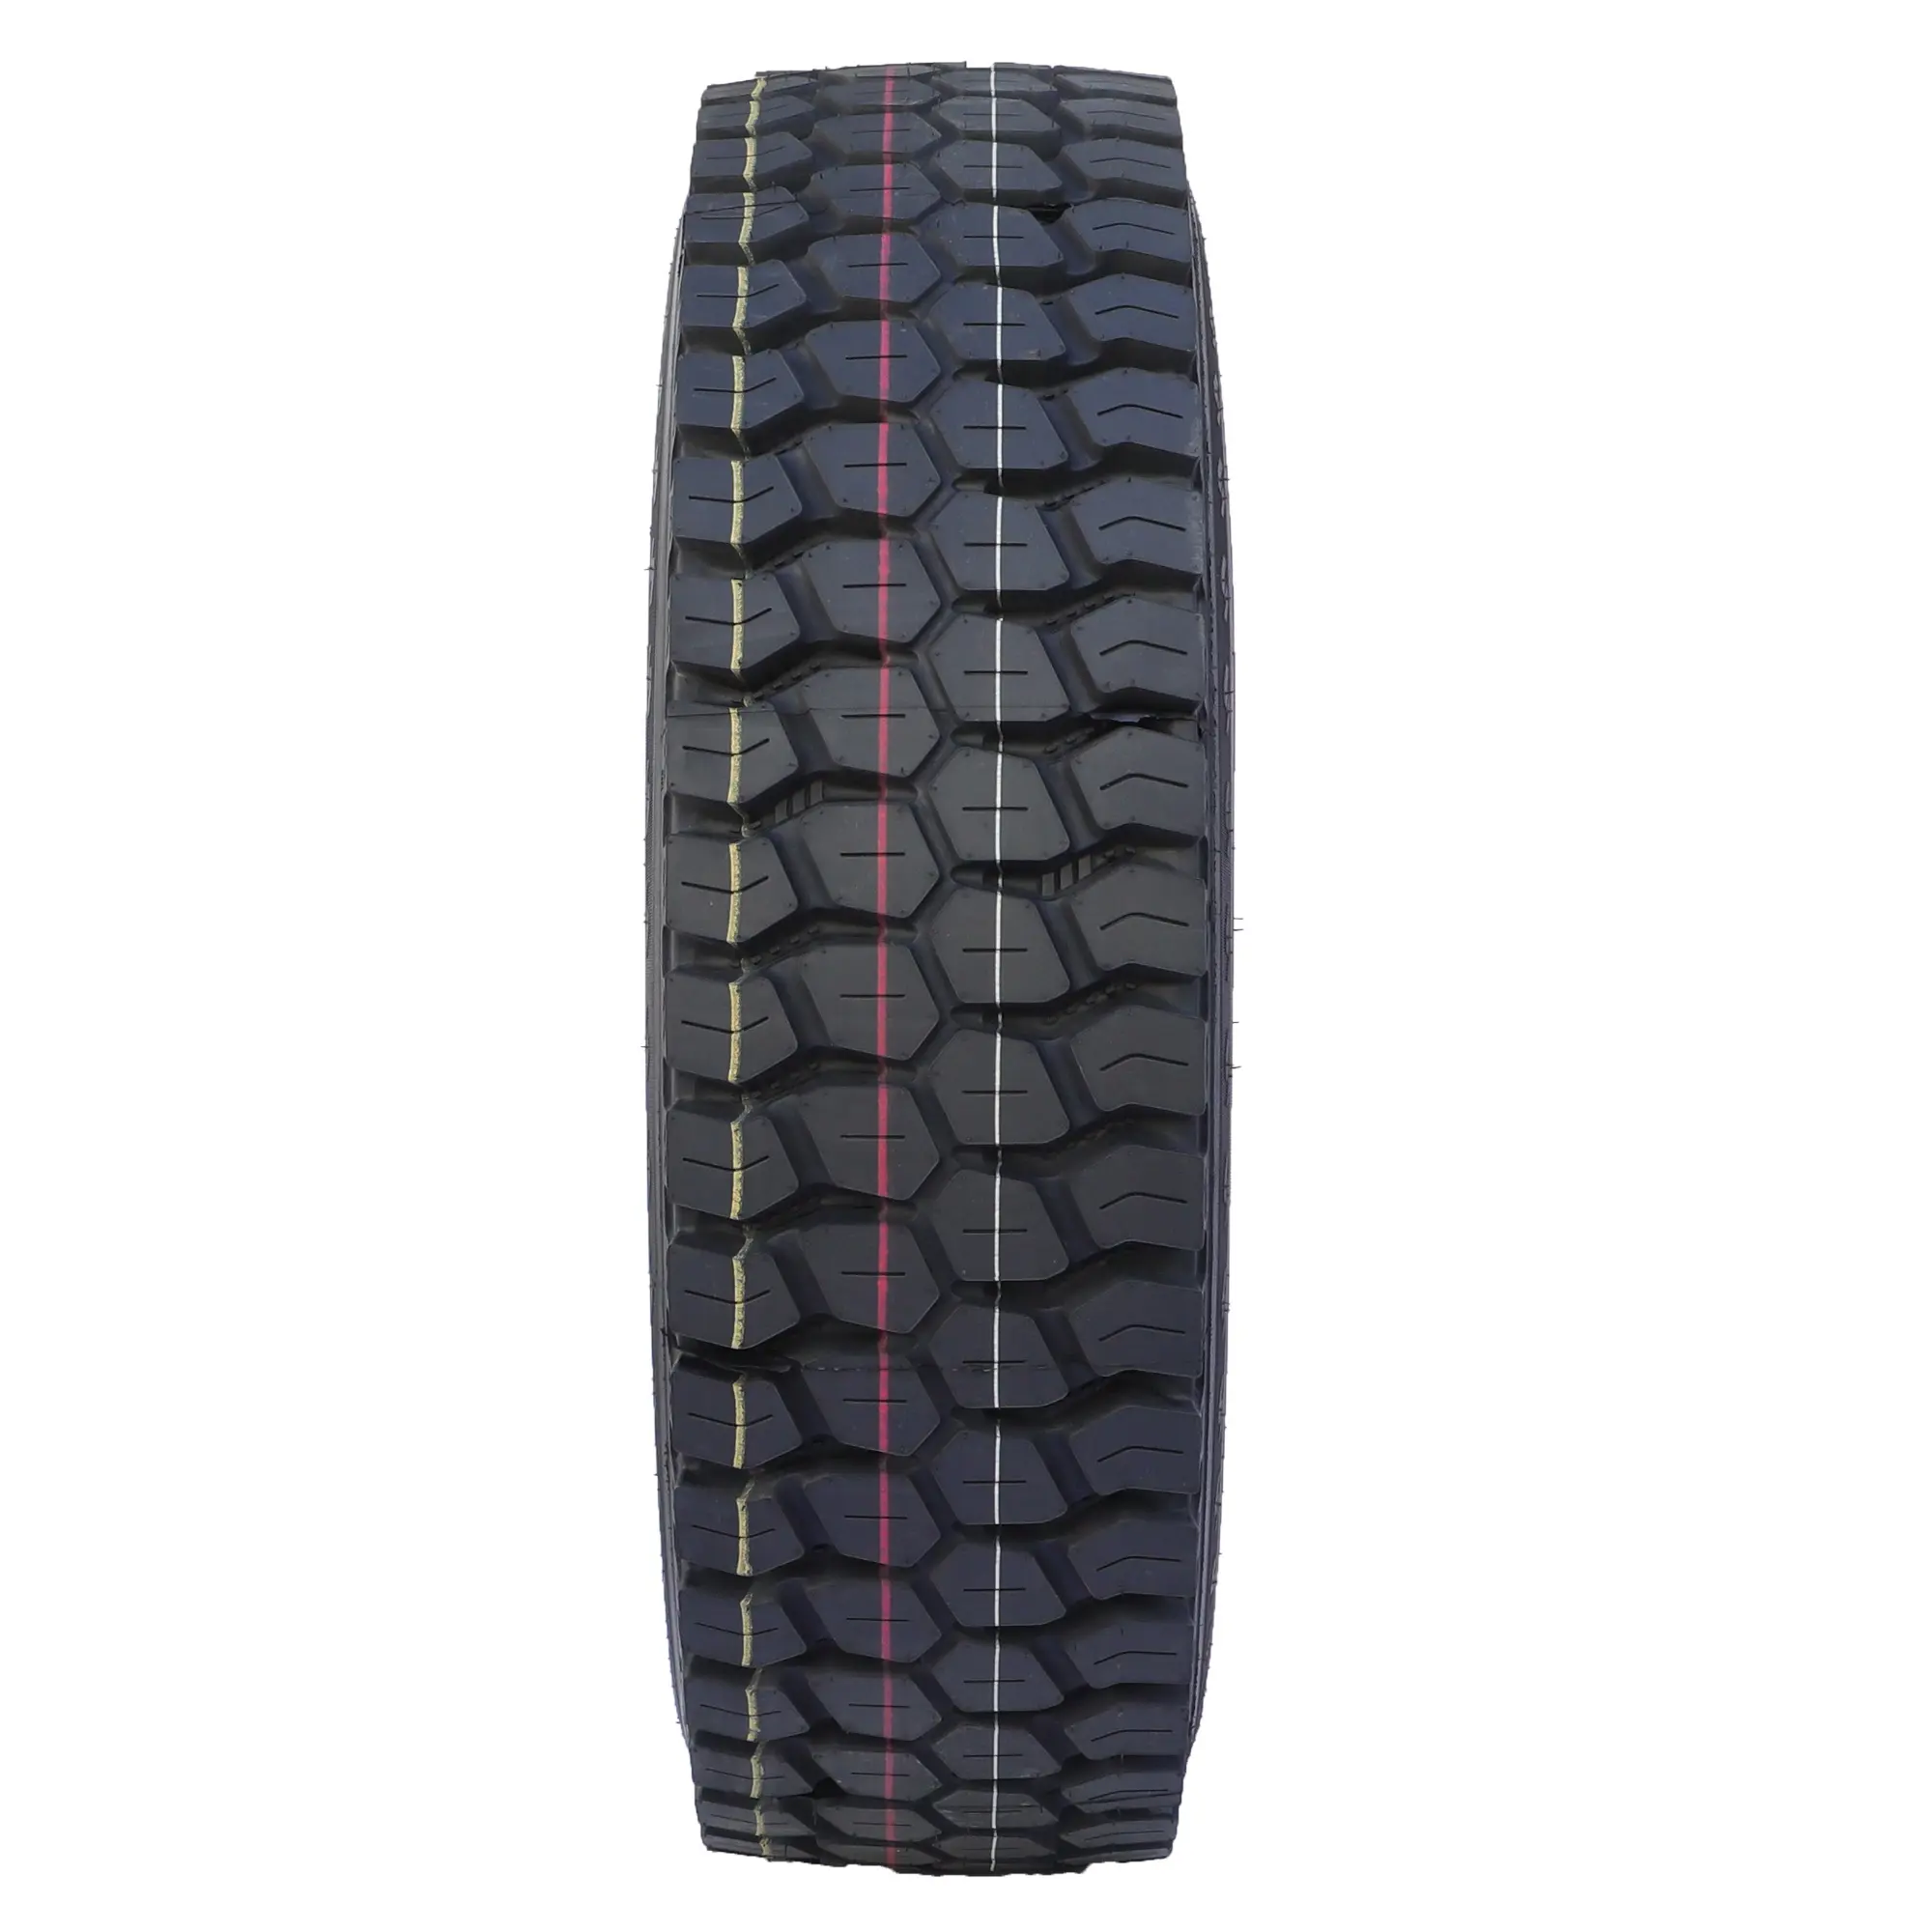 China brand SUPERHAWK HAWKWAY 11.00R20 HK750 radial truck&bus tires tyres with good price